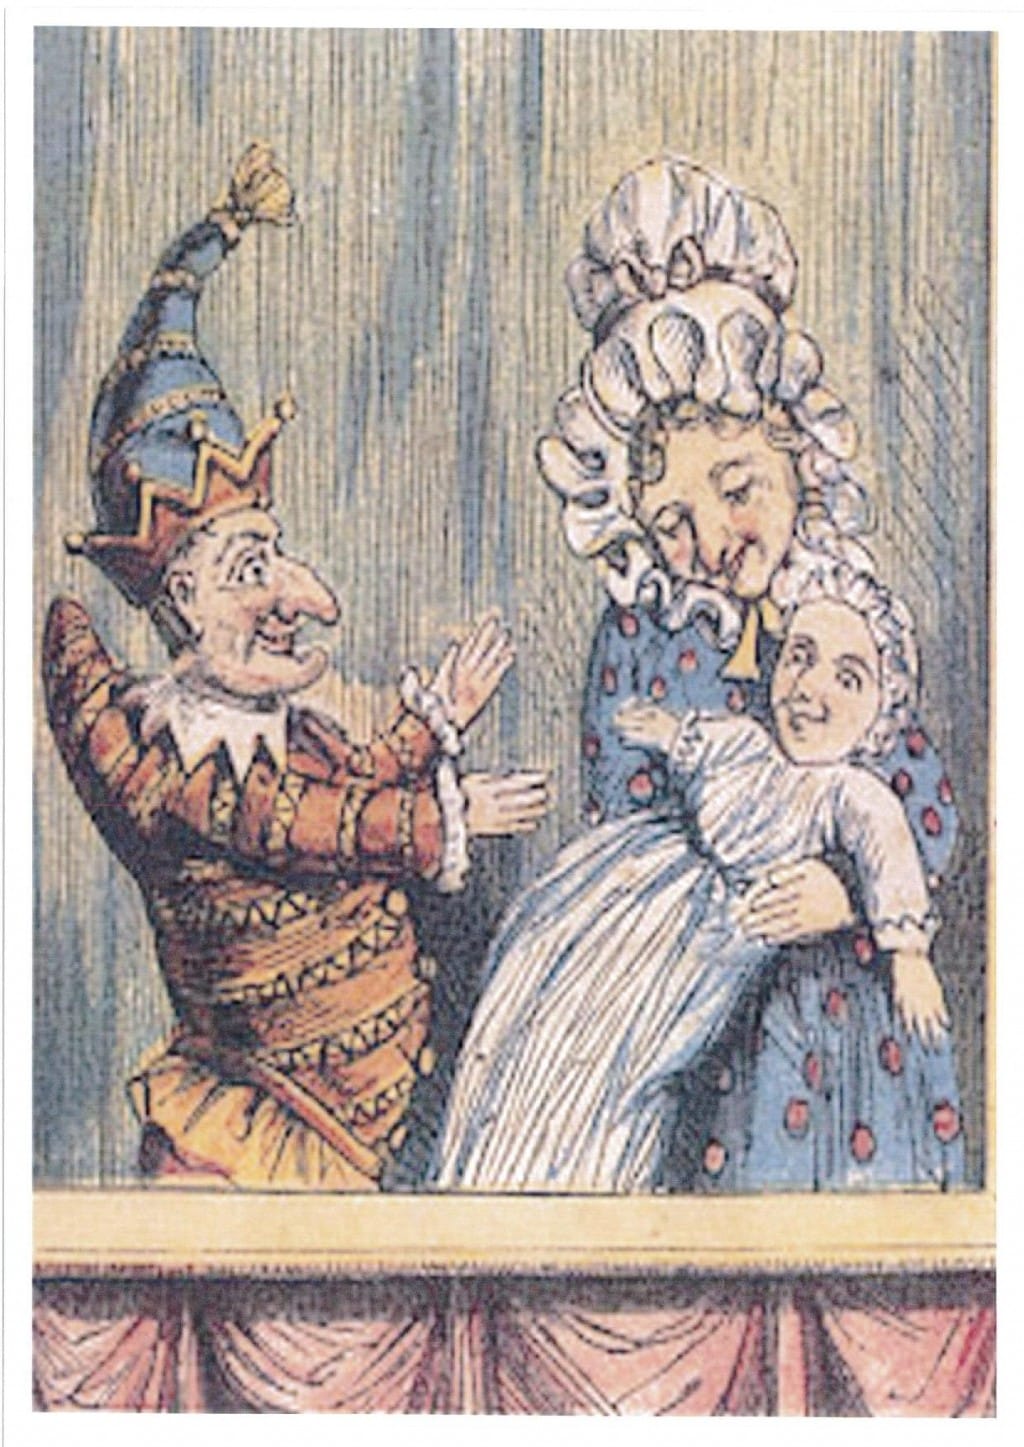 Fly poster for Dead Dog in a Suitcase. Vintage, Victorian style illustration depicting a man with a tall, blue jester style hat, with an ornate suit top. To his left, is a lady wearing a white, Victorian style bonnet and blue dress with red polka dots. She is holding a baby. The figures appear to be the puppet characters, Punch and Judy. Punch is holding out his arms towards Judy and the baby. All the characters are smiling. They appear to be in a puppet theatre, as there are red velvet curtain drapes to the bottom of the image.